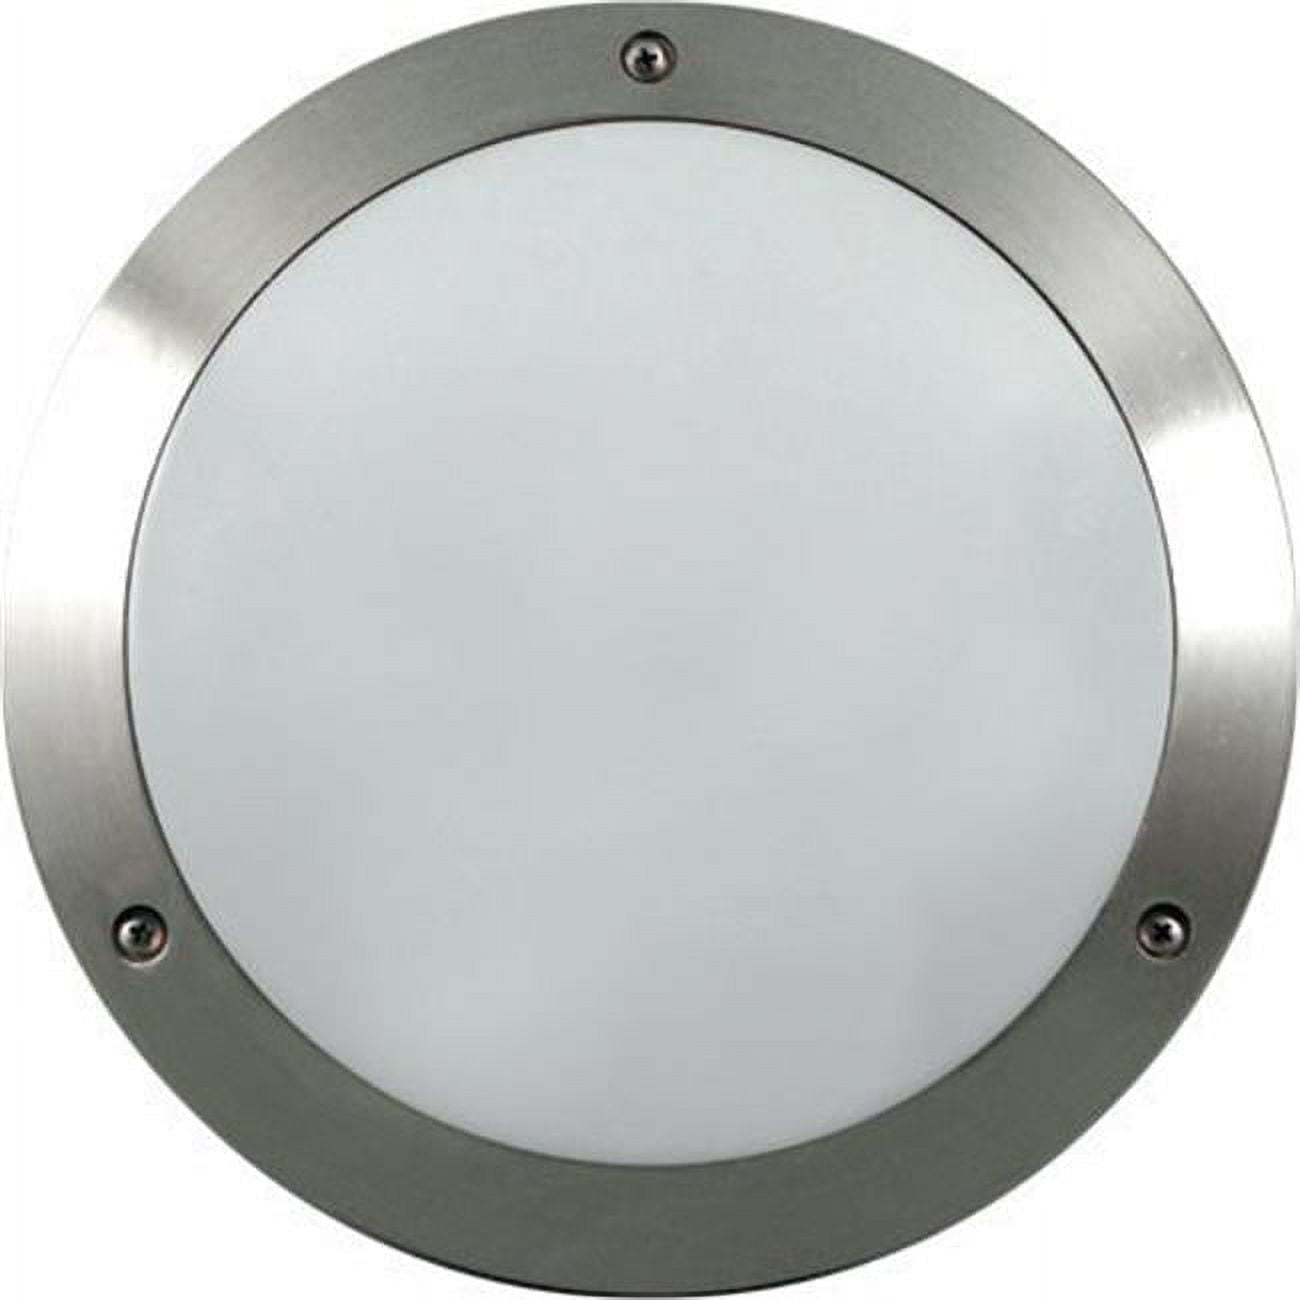 Picture of Dabmar Lighting W3900-LED12-SS Cast Aluminum Wall Fixture LED - 12W 120V, Stainless Steel